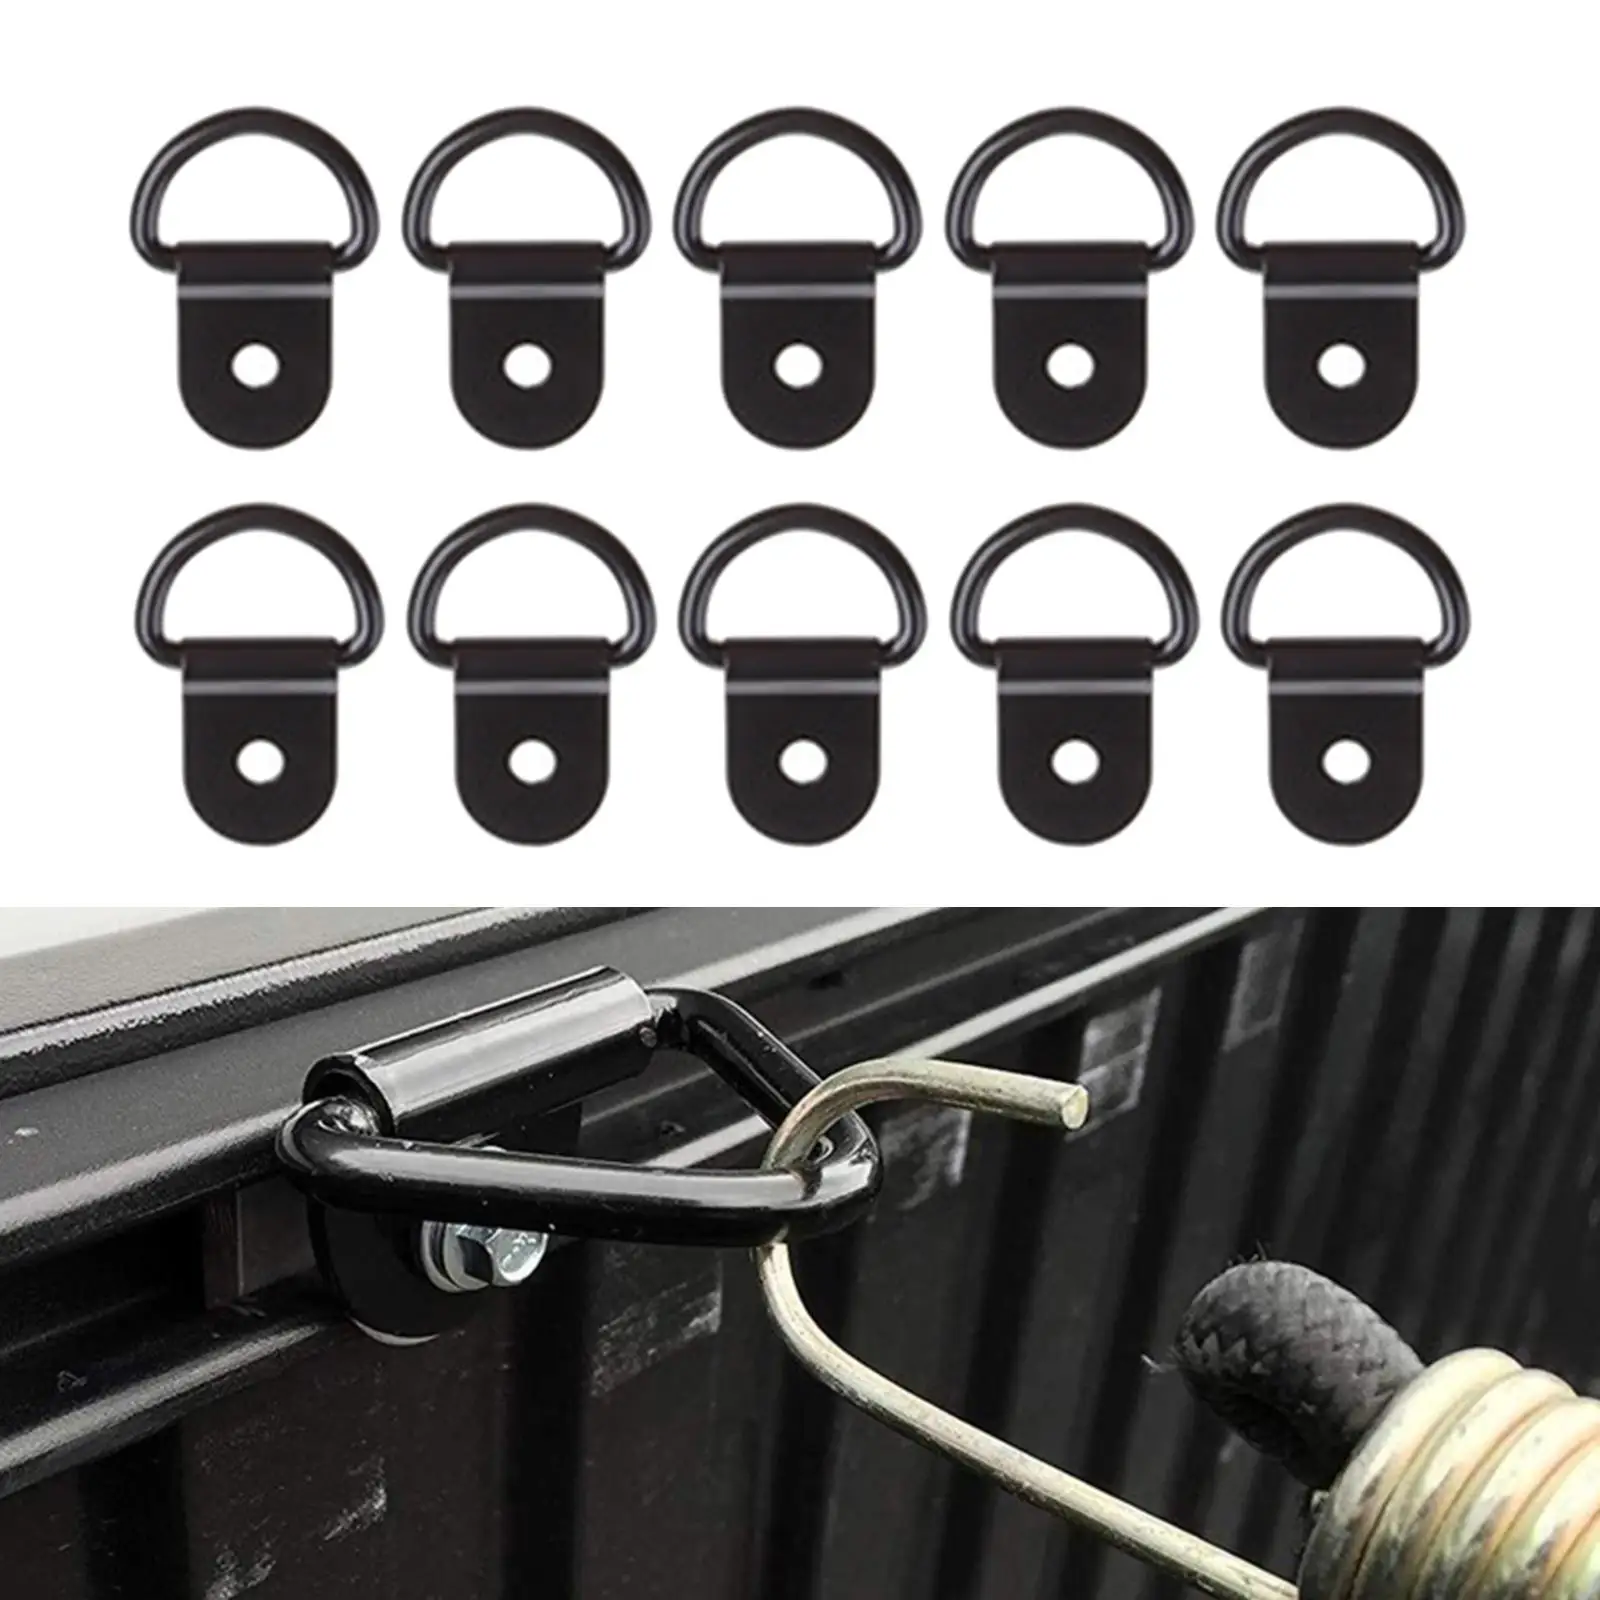 3X 10Pcs D Tie Down Anchors Black Tie Down Fit for RV Trailers Boats